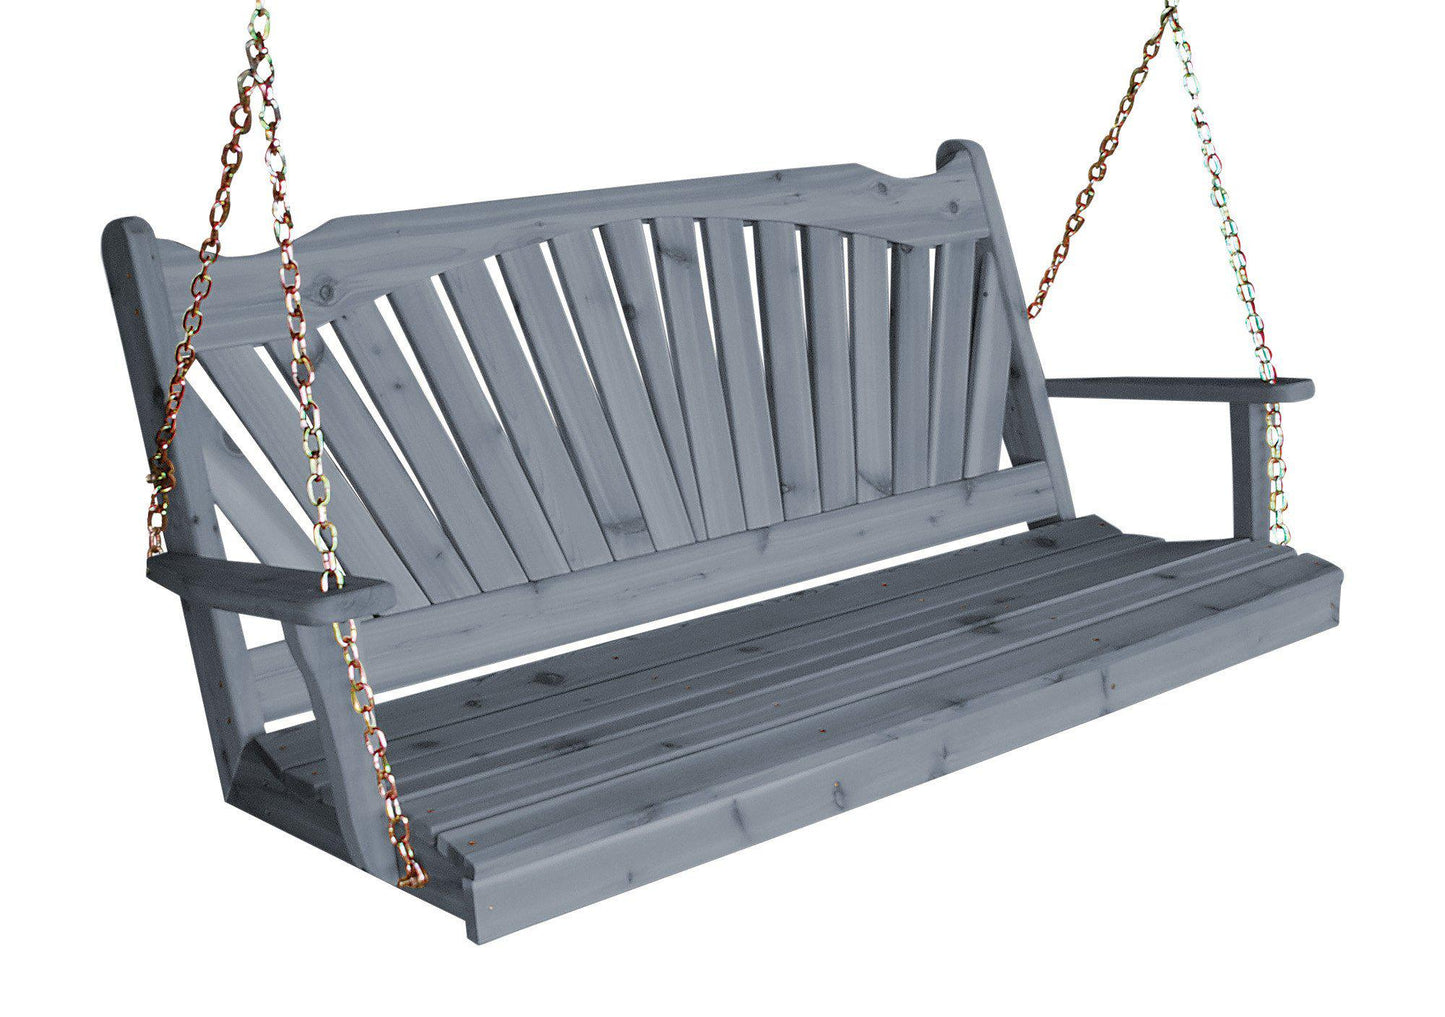 A&L FURNITURE CO. Western Red Cedar 4' Fanback Swing - LEAD TIME TO SHIP 4 WEEKS OR LESS